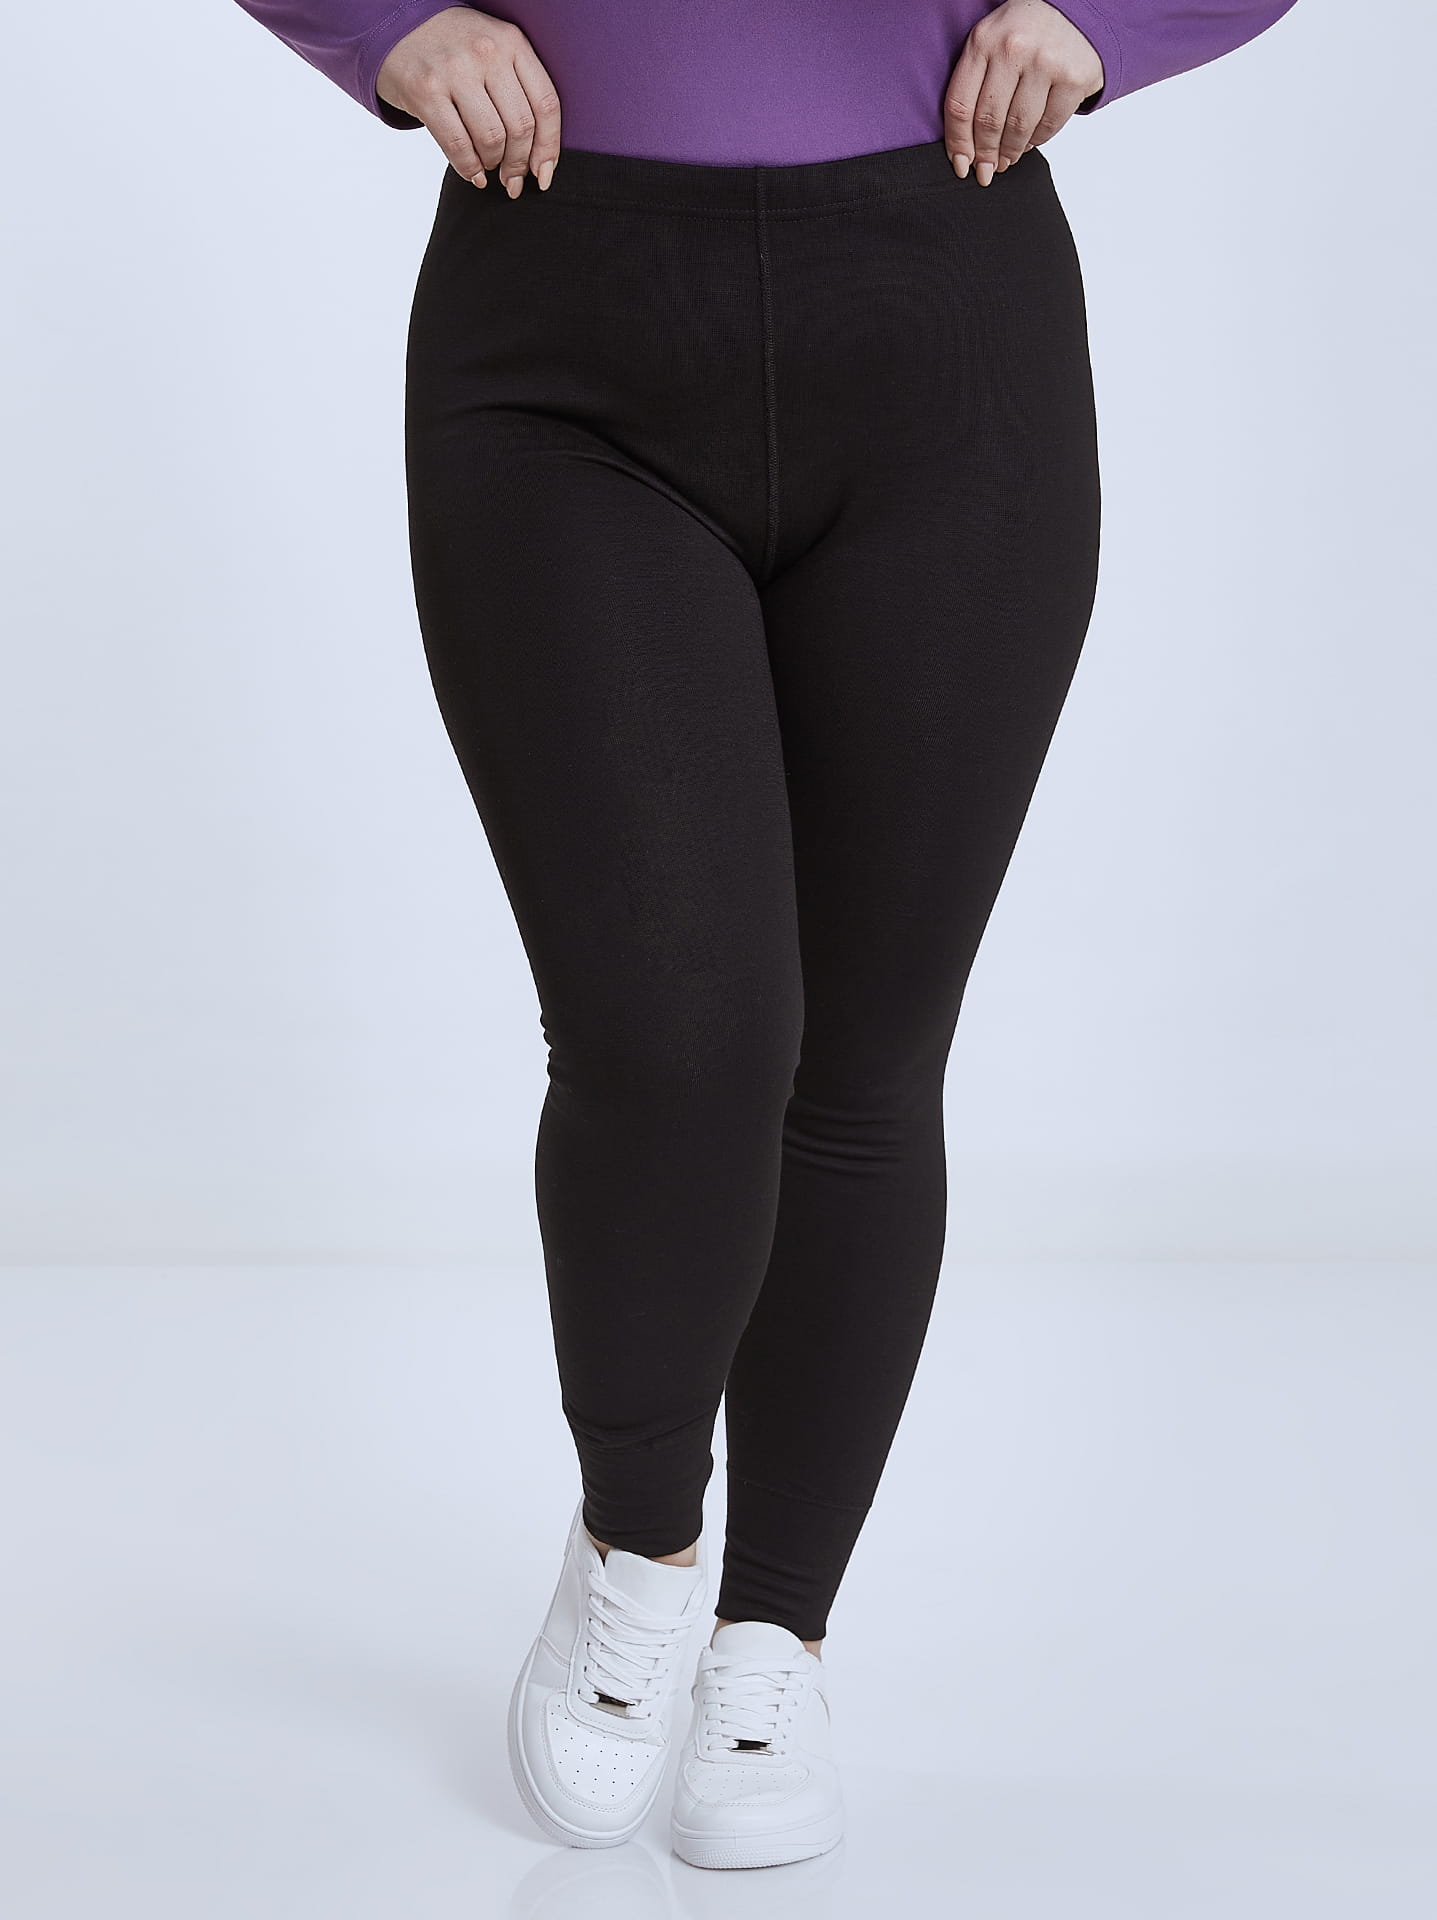 Thermal trousers curvy in black, 9.99€